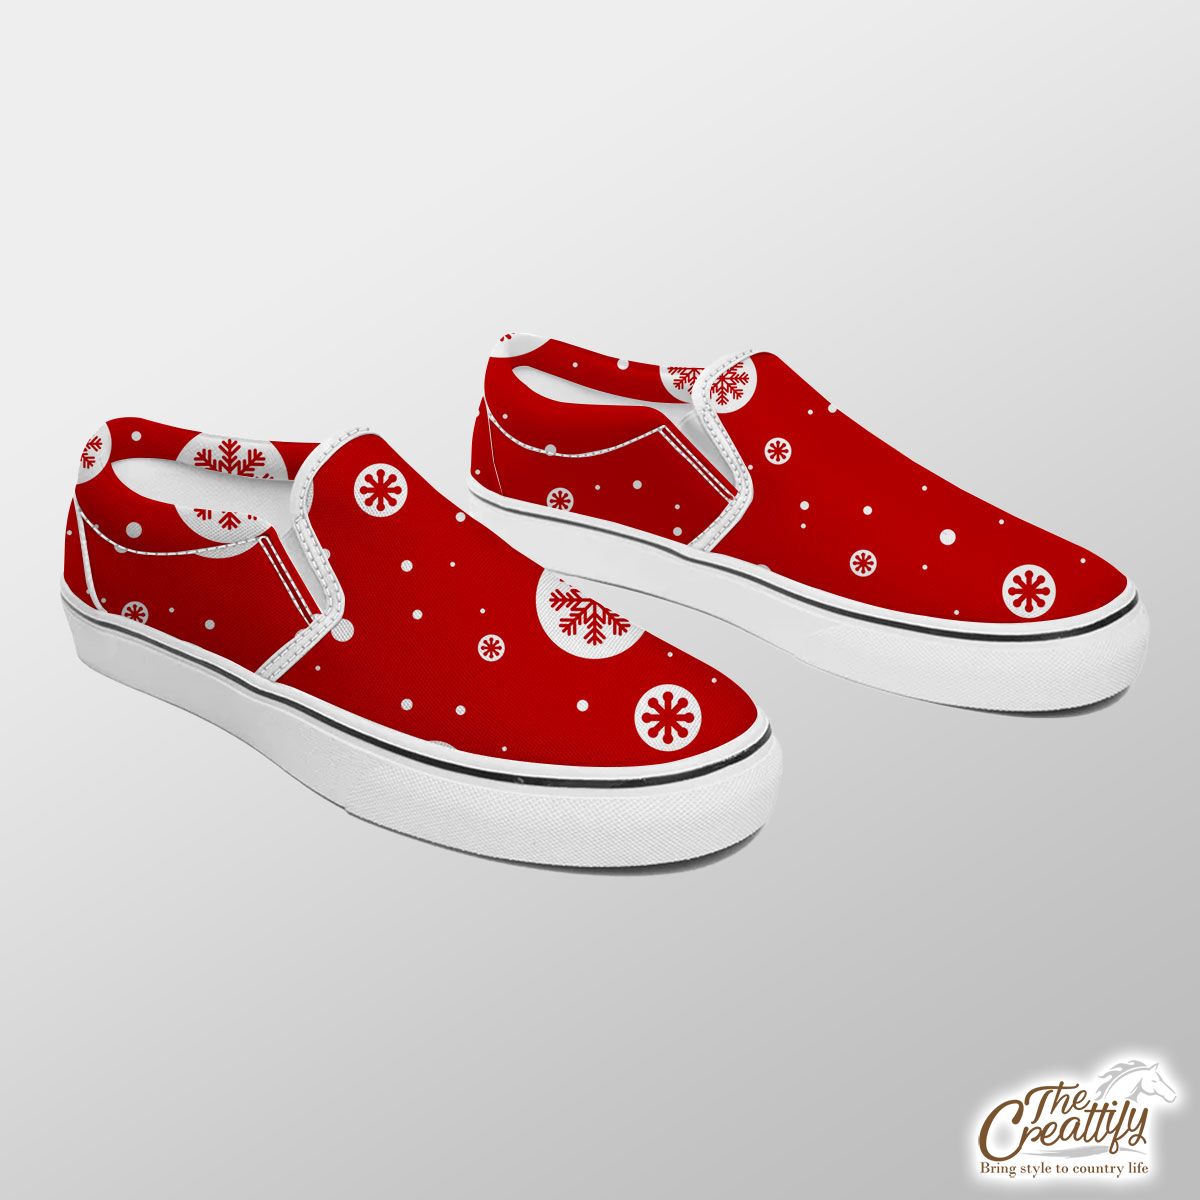 Snowflake Clipart On The Red Background Slip On Sneakers